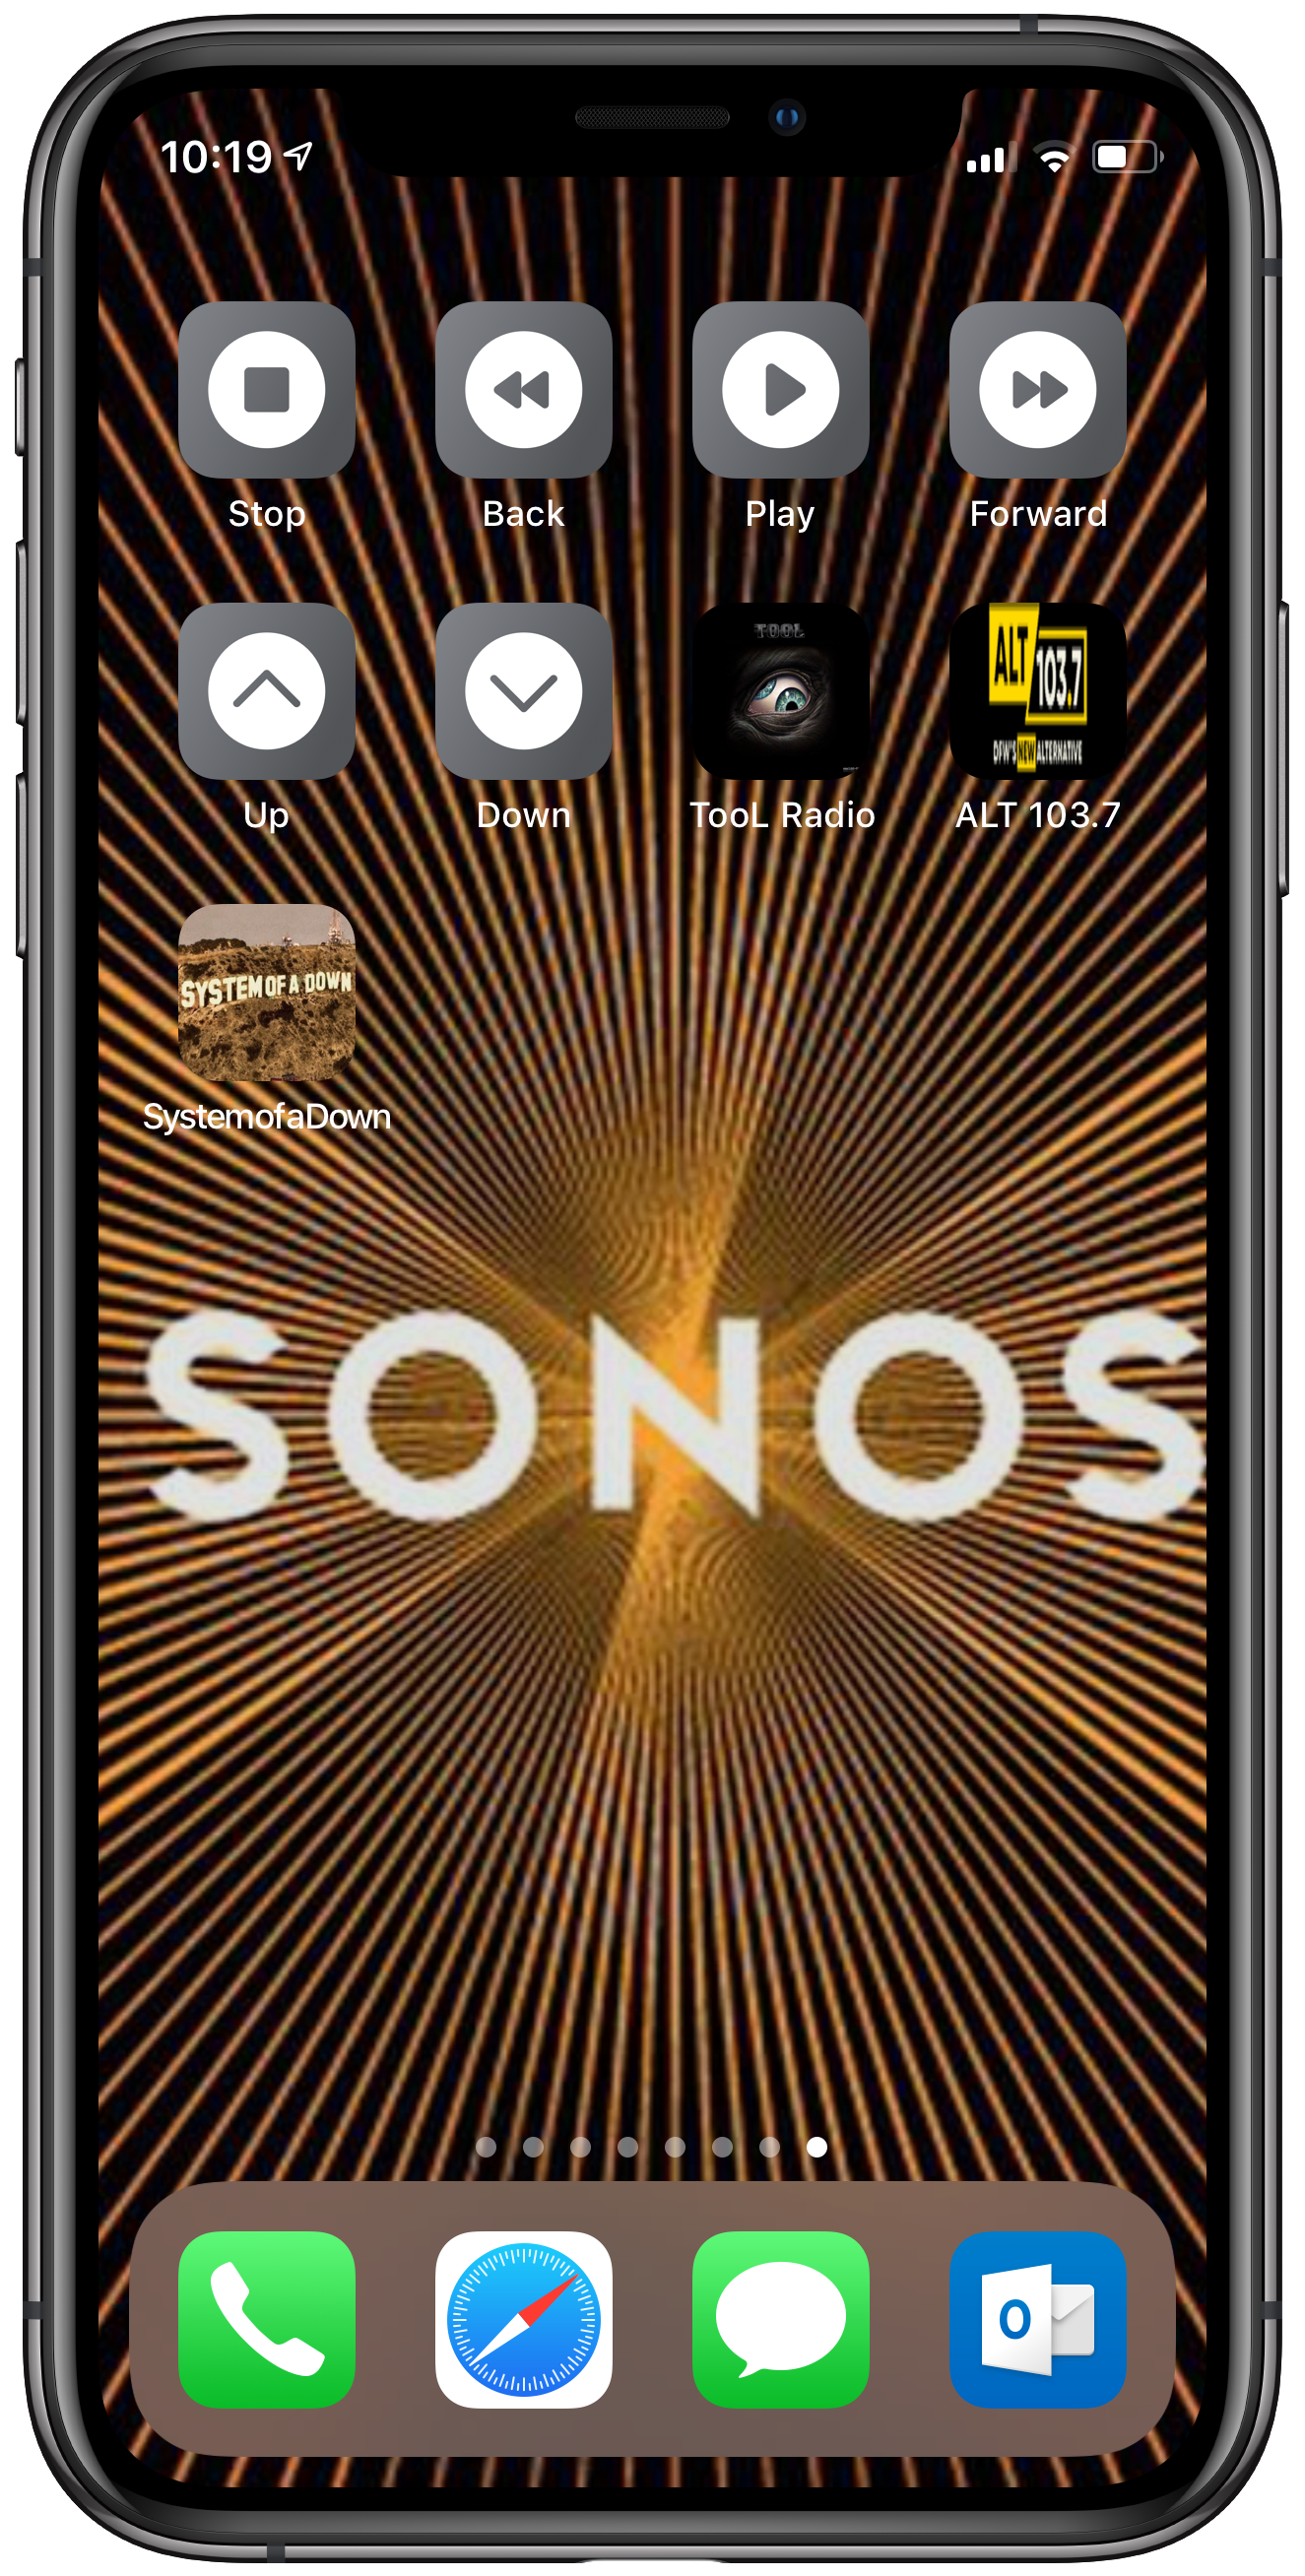 Turn an old into a Sonos remote Community